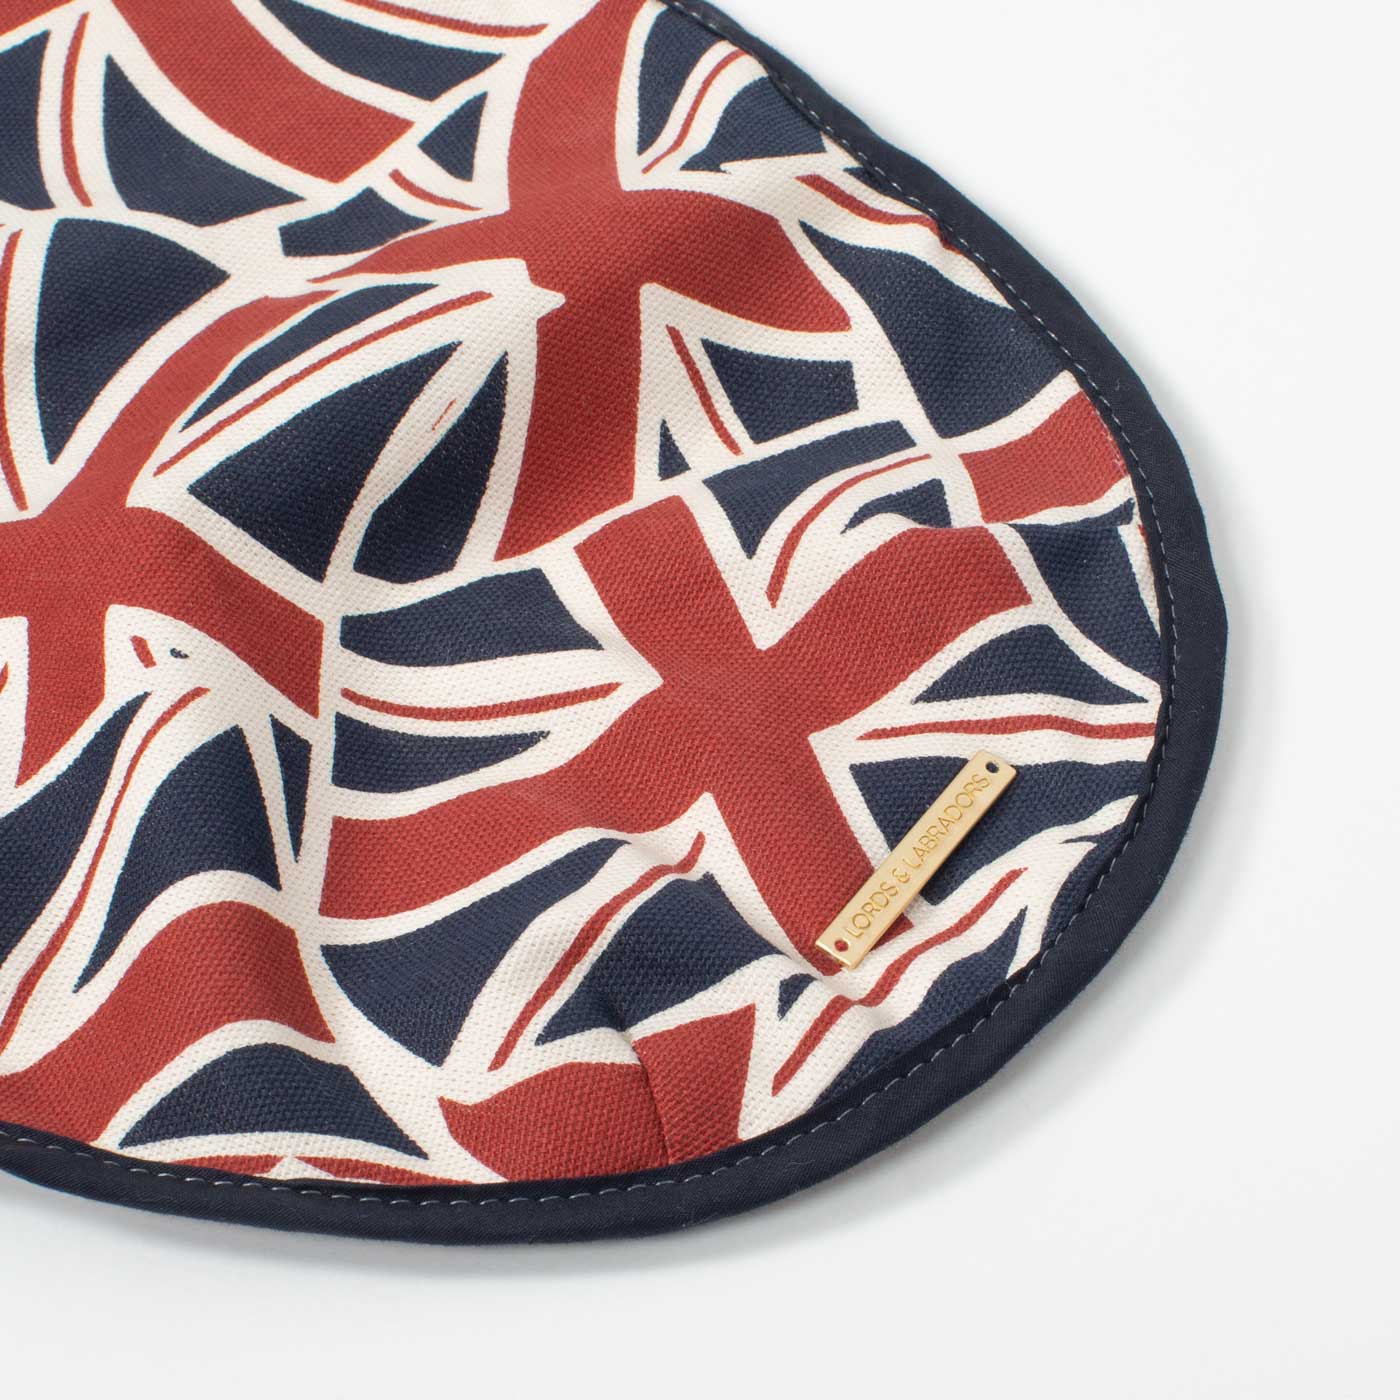 Accessorize Your Pet, With Our Stunning Dog Coat, in Union Jack! Comes In four Size, And Totally Machine Washable, Available To Personalize Now at Lords & Labradors US